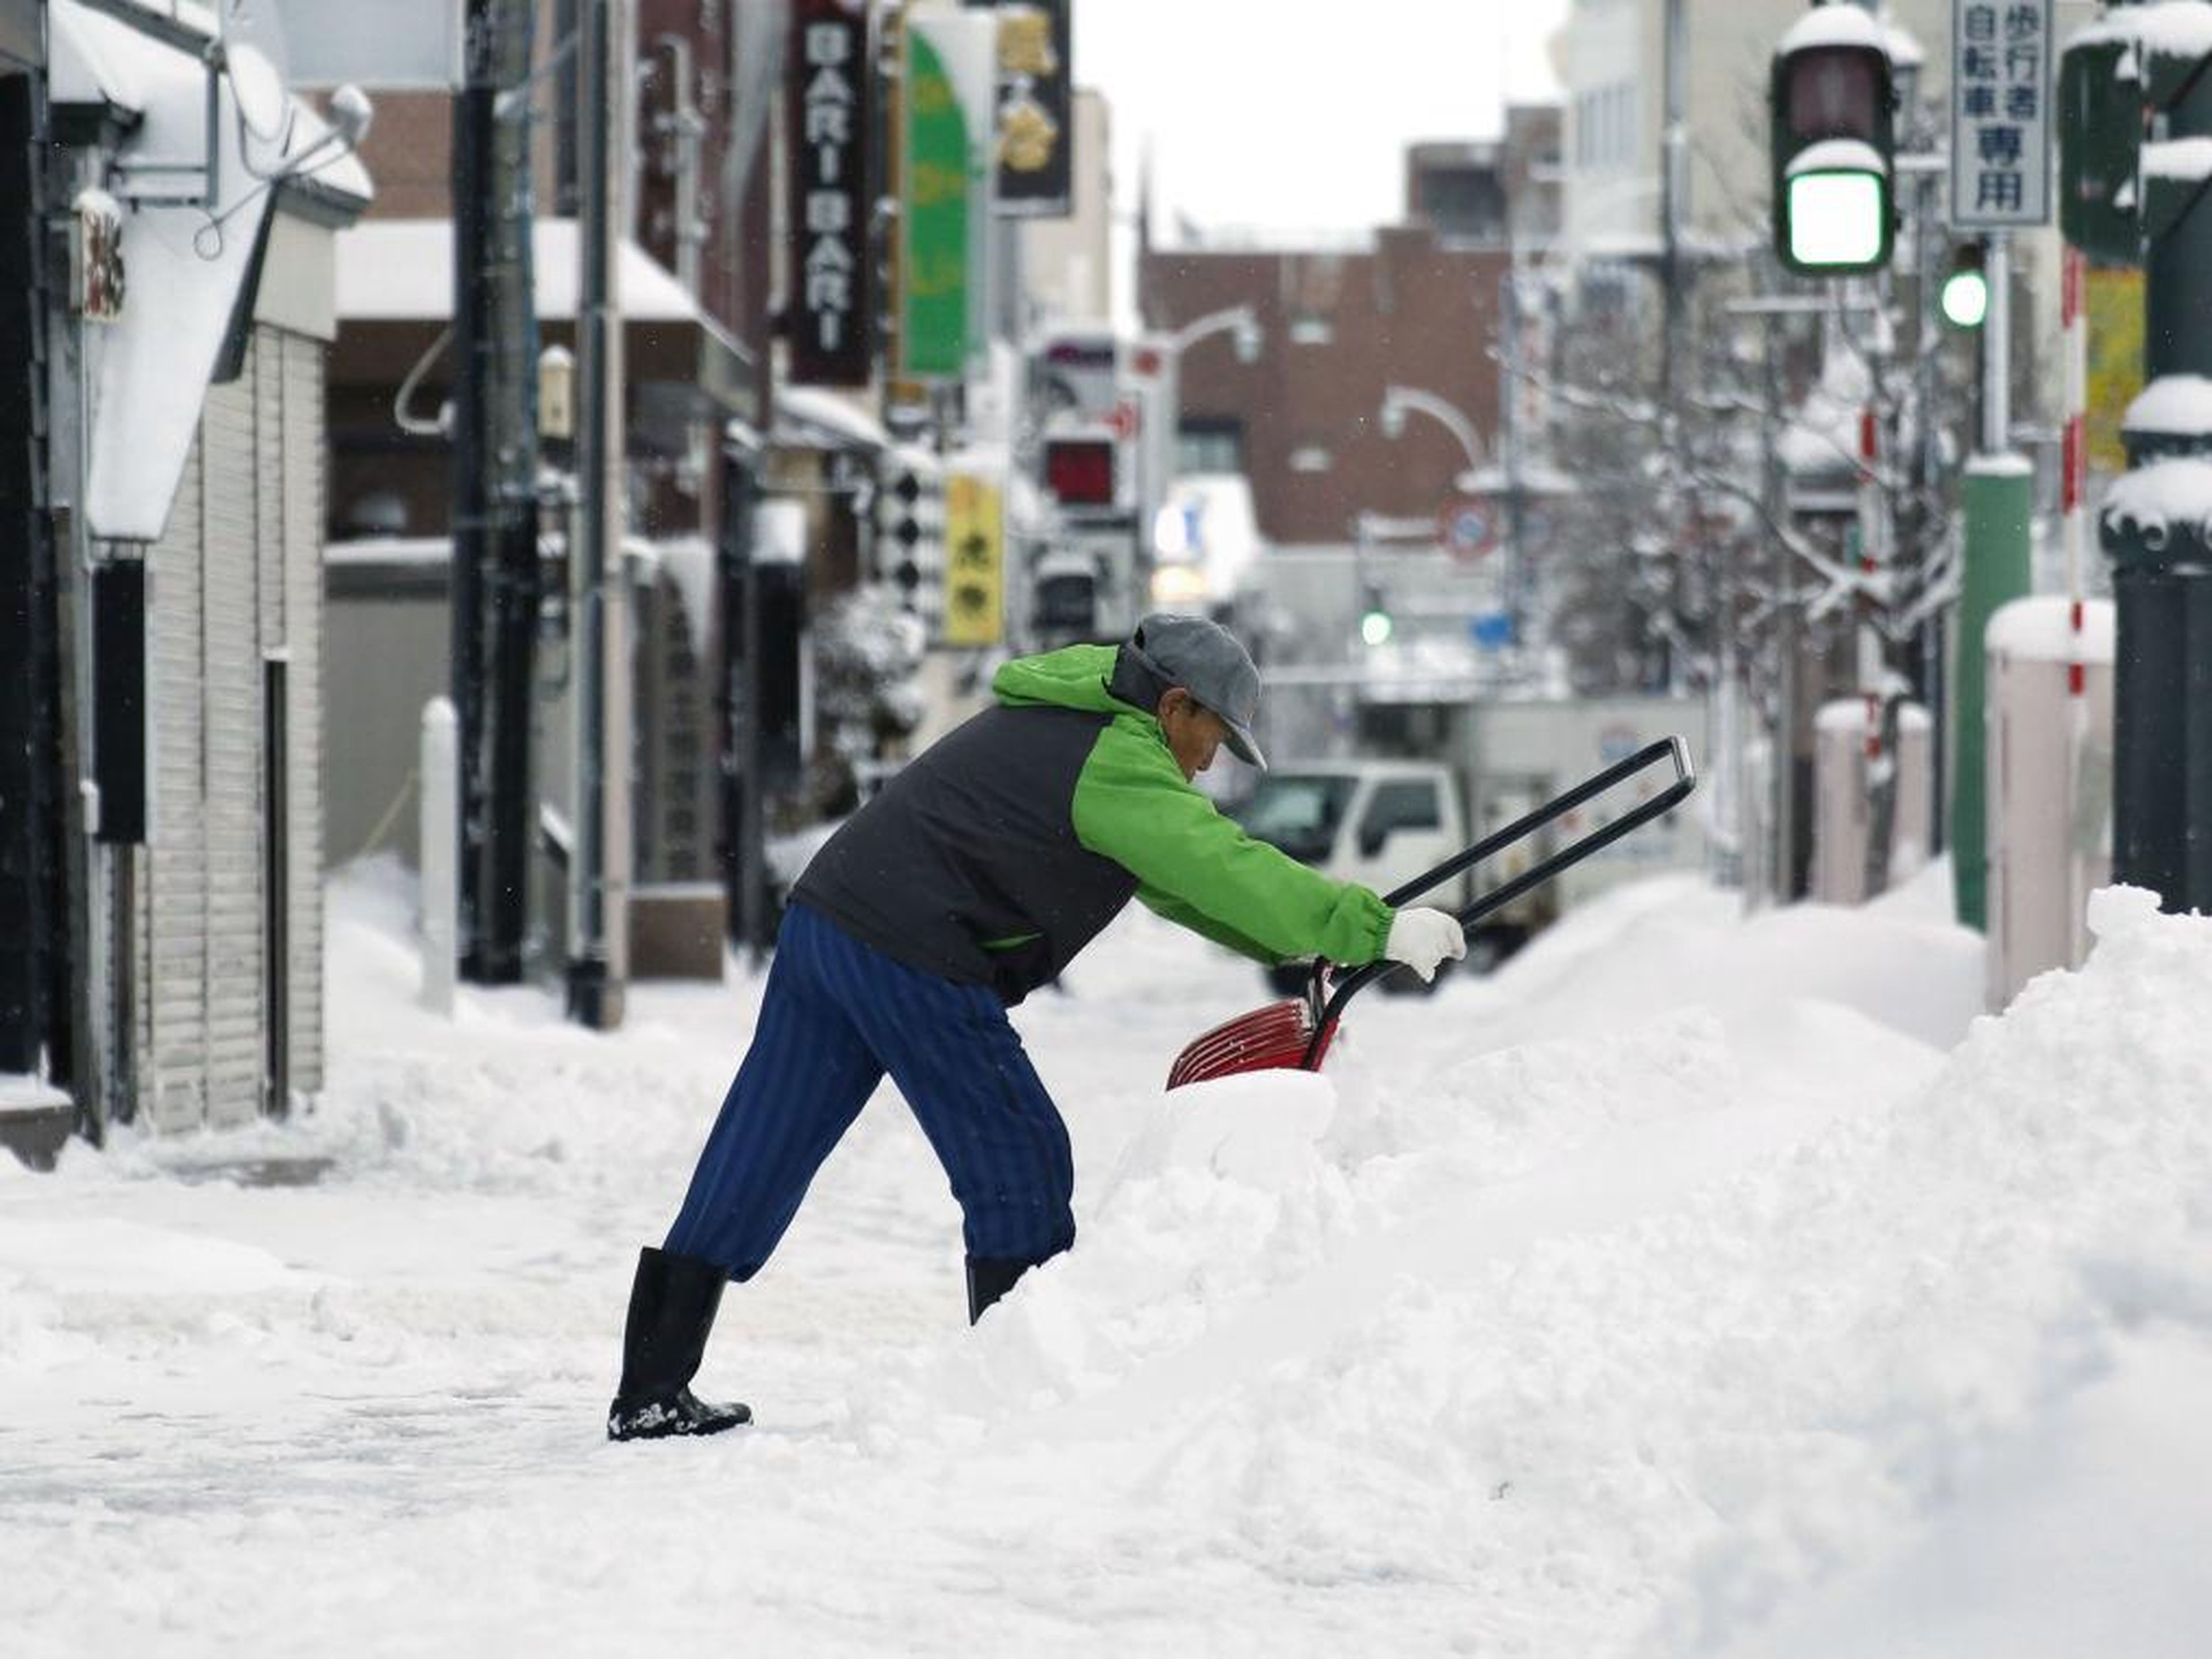 Some in Japan believe that shoveling or removing snow should be considered exercise rather than laborious work. For example, the Japan José Size Association provides precautions and best practices for turning snow removal into a